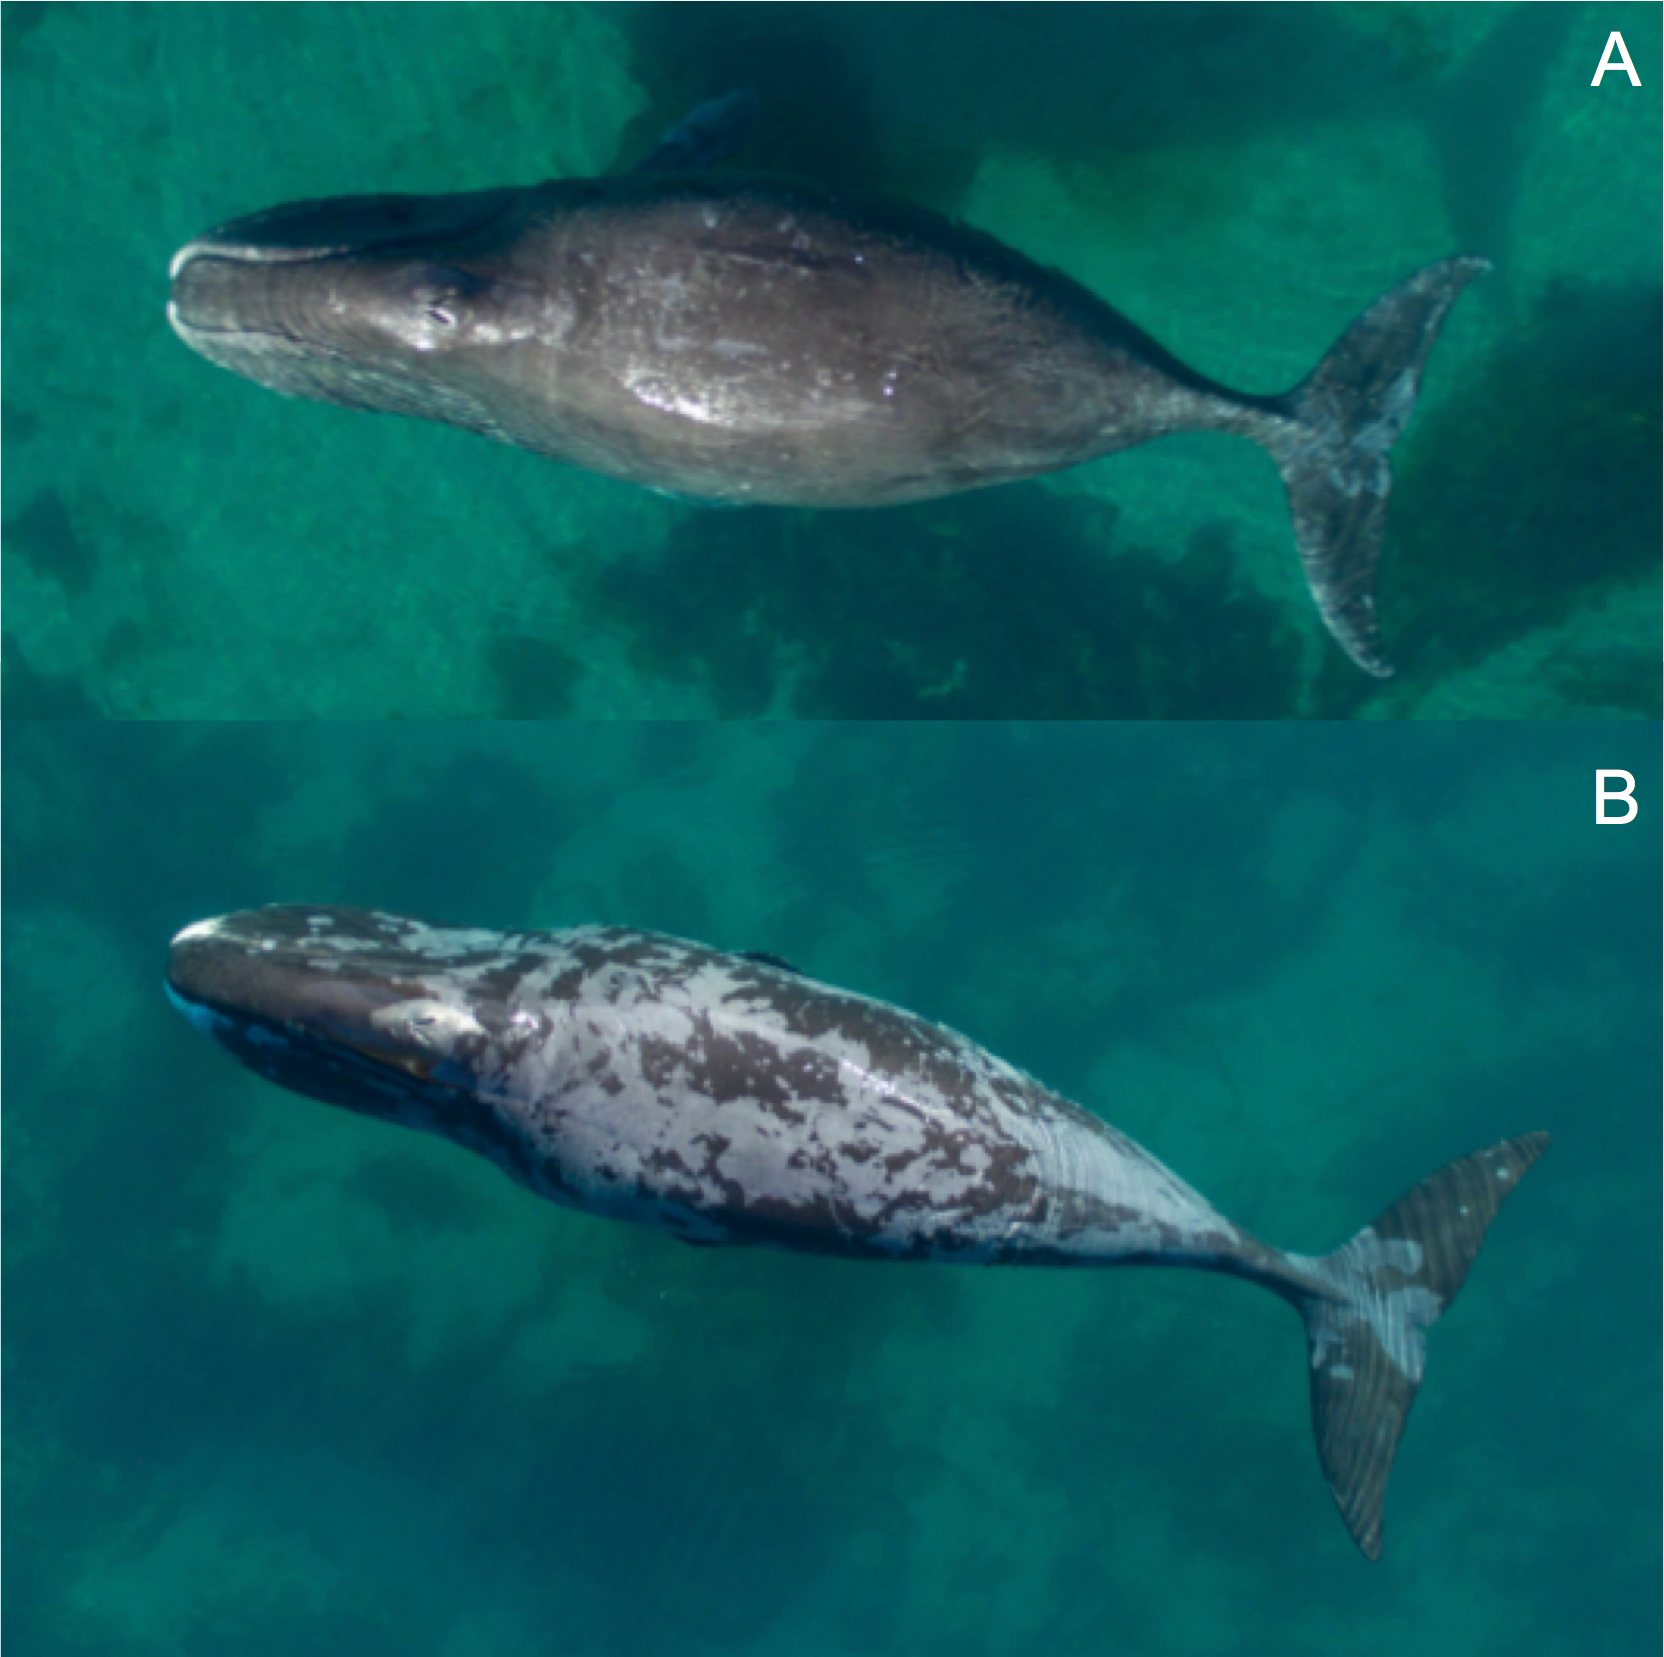 Summertime skincare: bowhead whales use rocks to help peel off molting skin